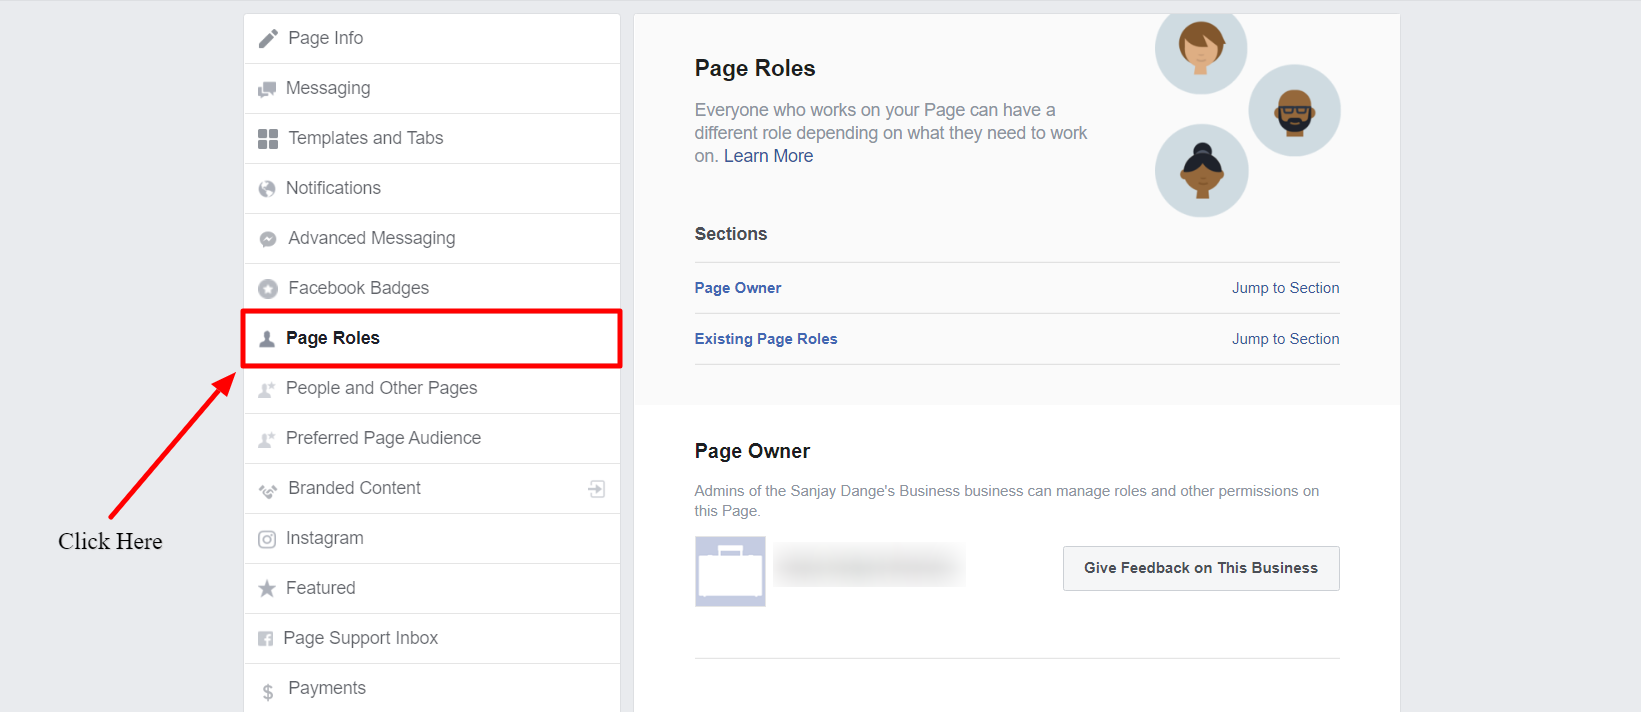 Click on Page Roles - How To Provide Facebook Page Admin Rights?